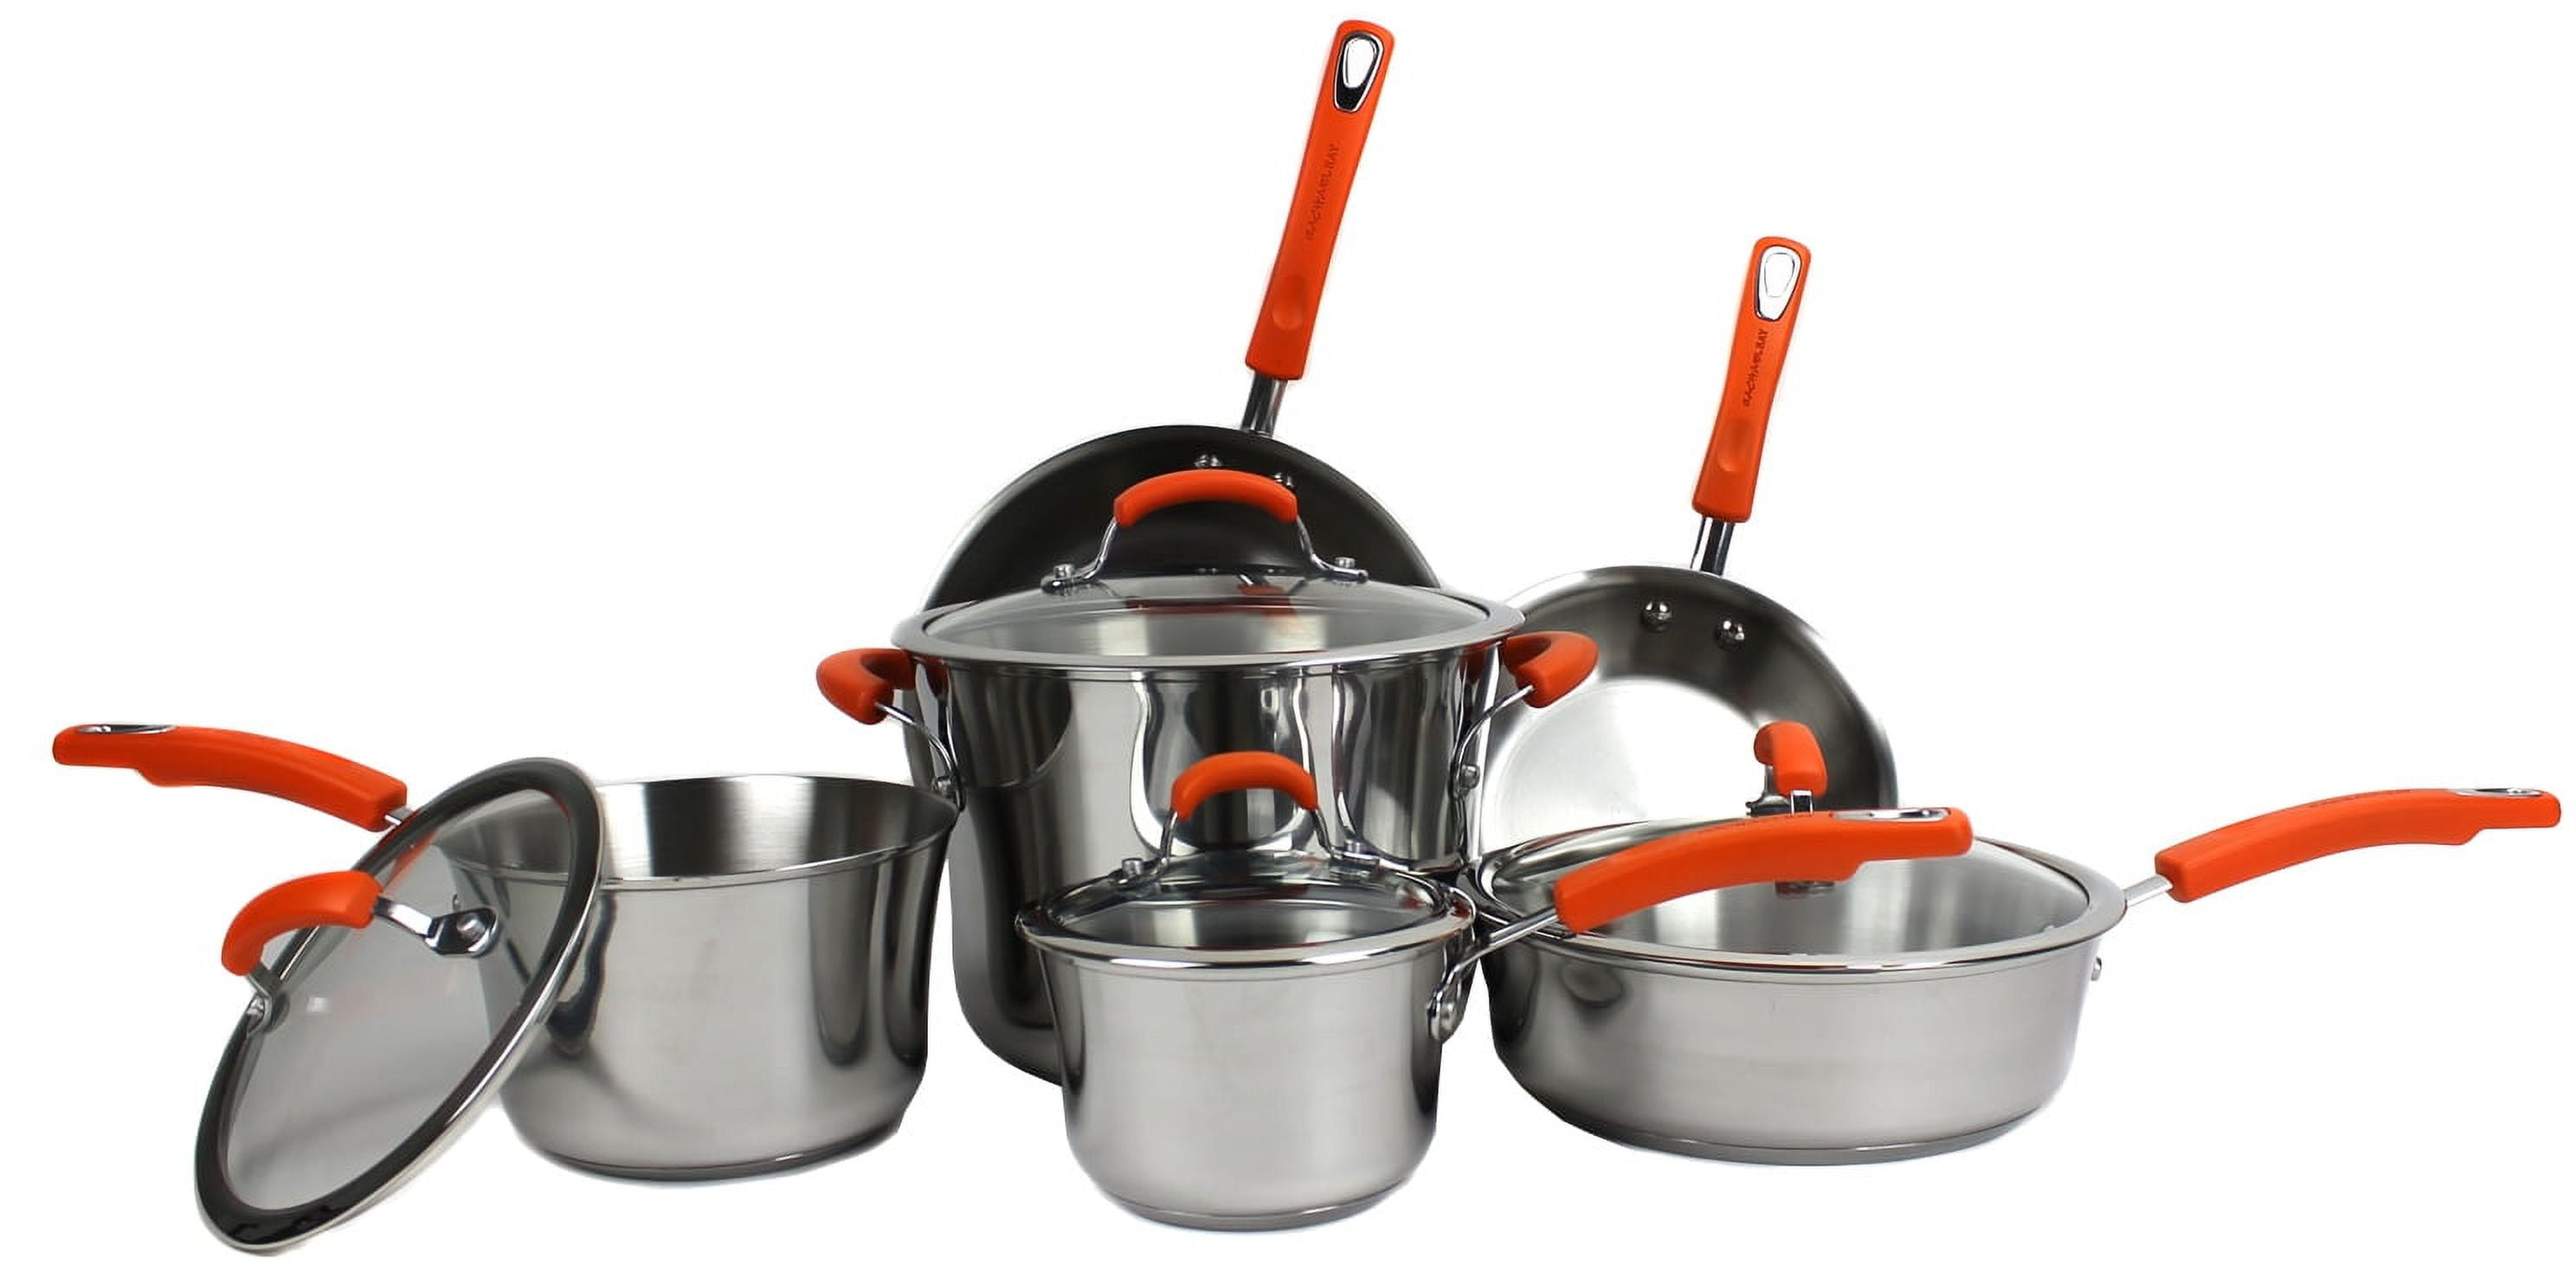  ROYDX 10-Piece Pots and Pans Set, Stainless Steel Pan